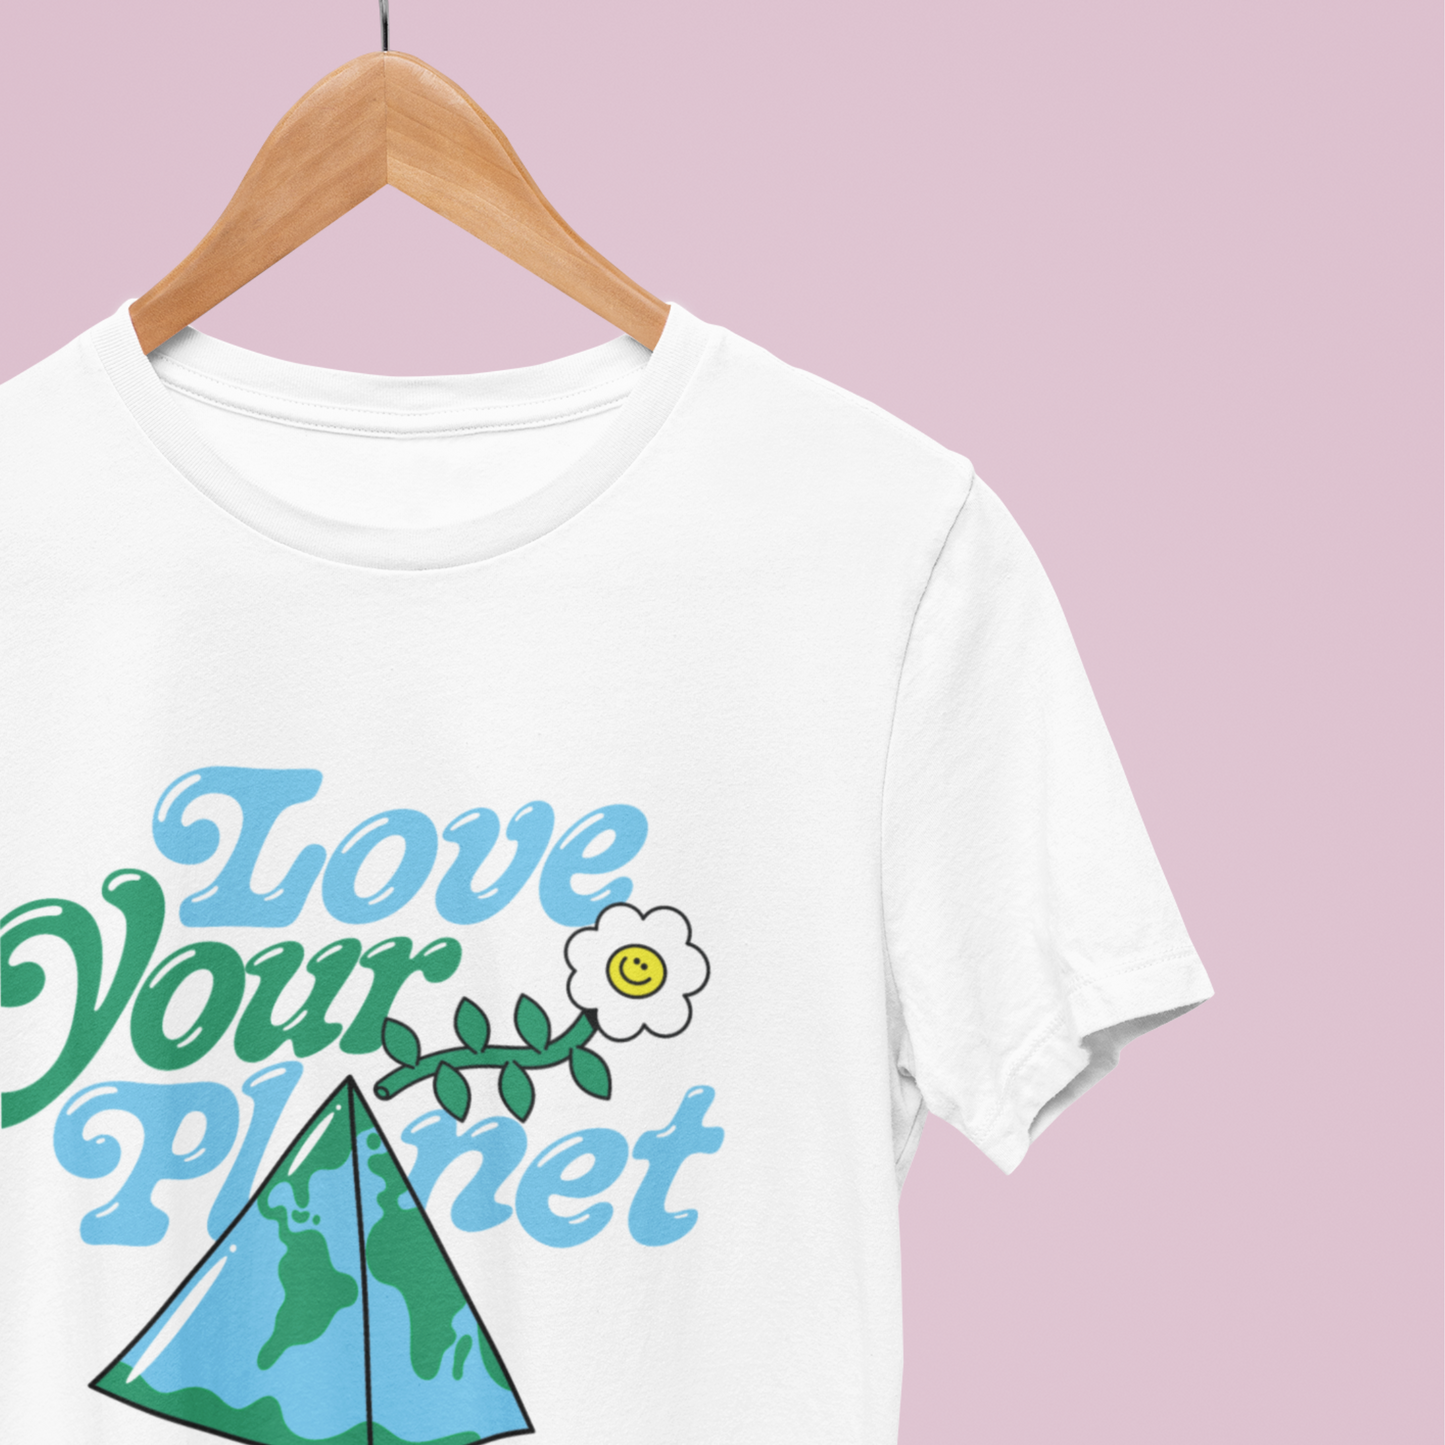 Love Your Planet - White T-shirt